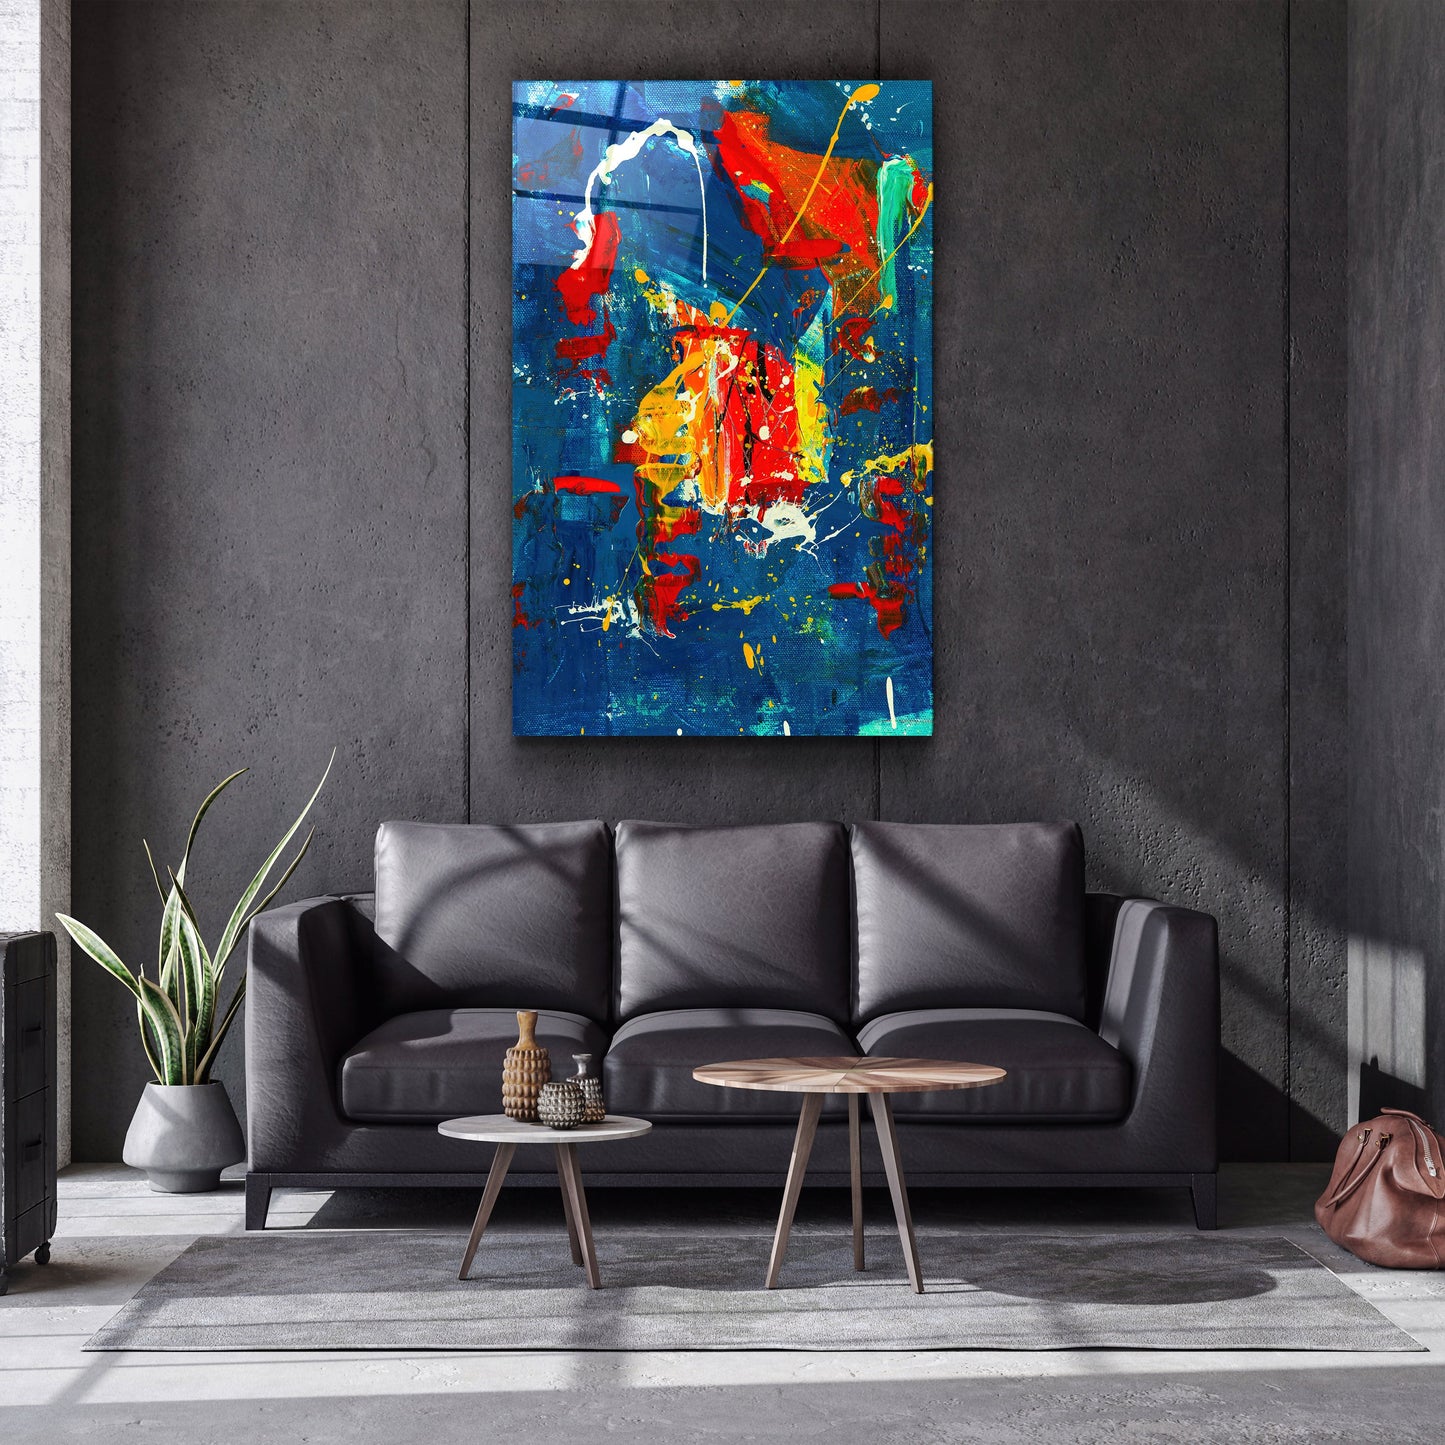 Oil Painting - Abstract - Designer's Collection Glass Wall Art